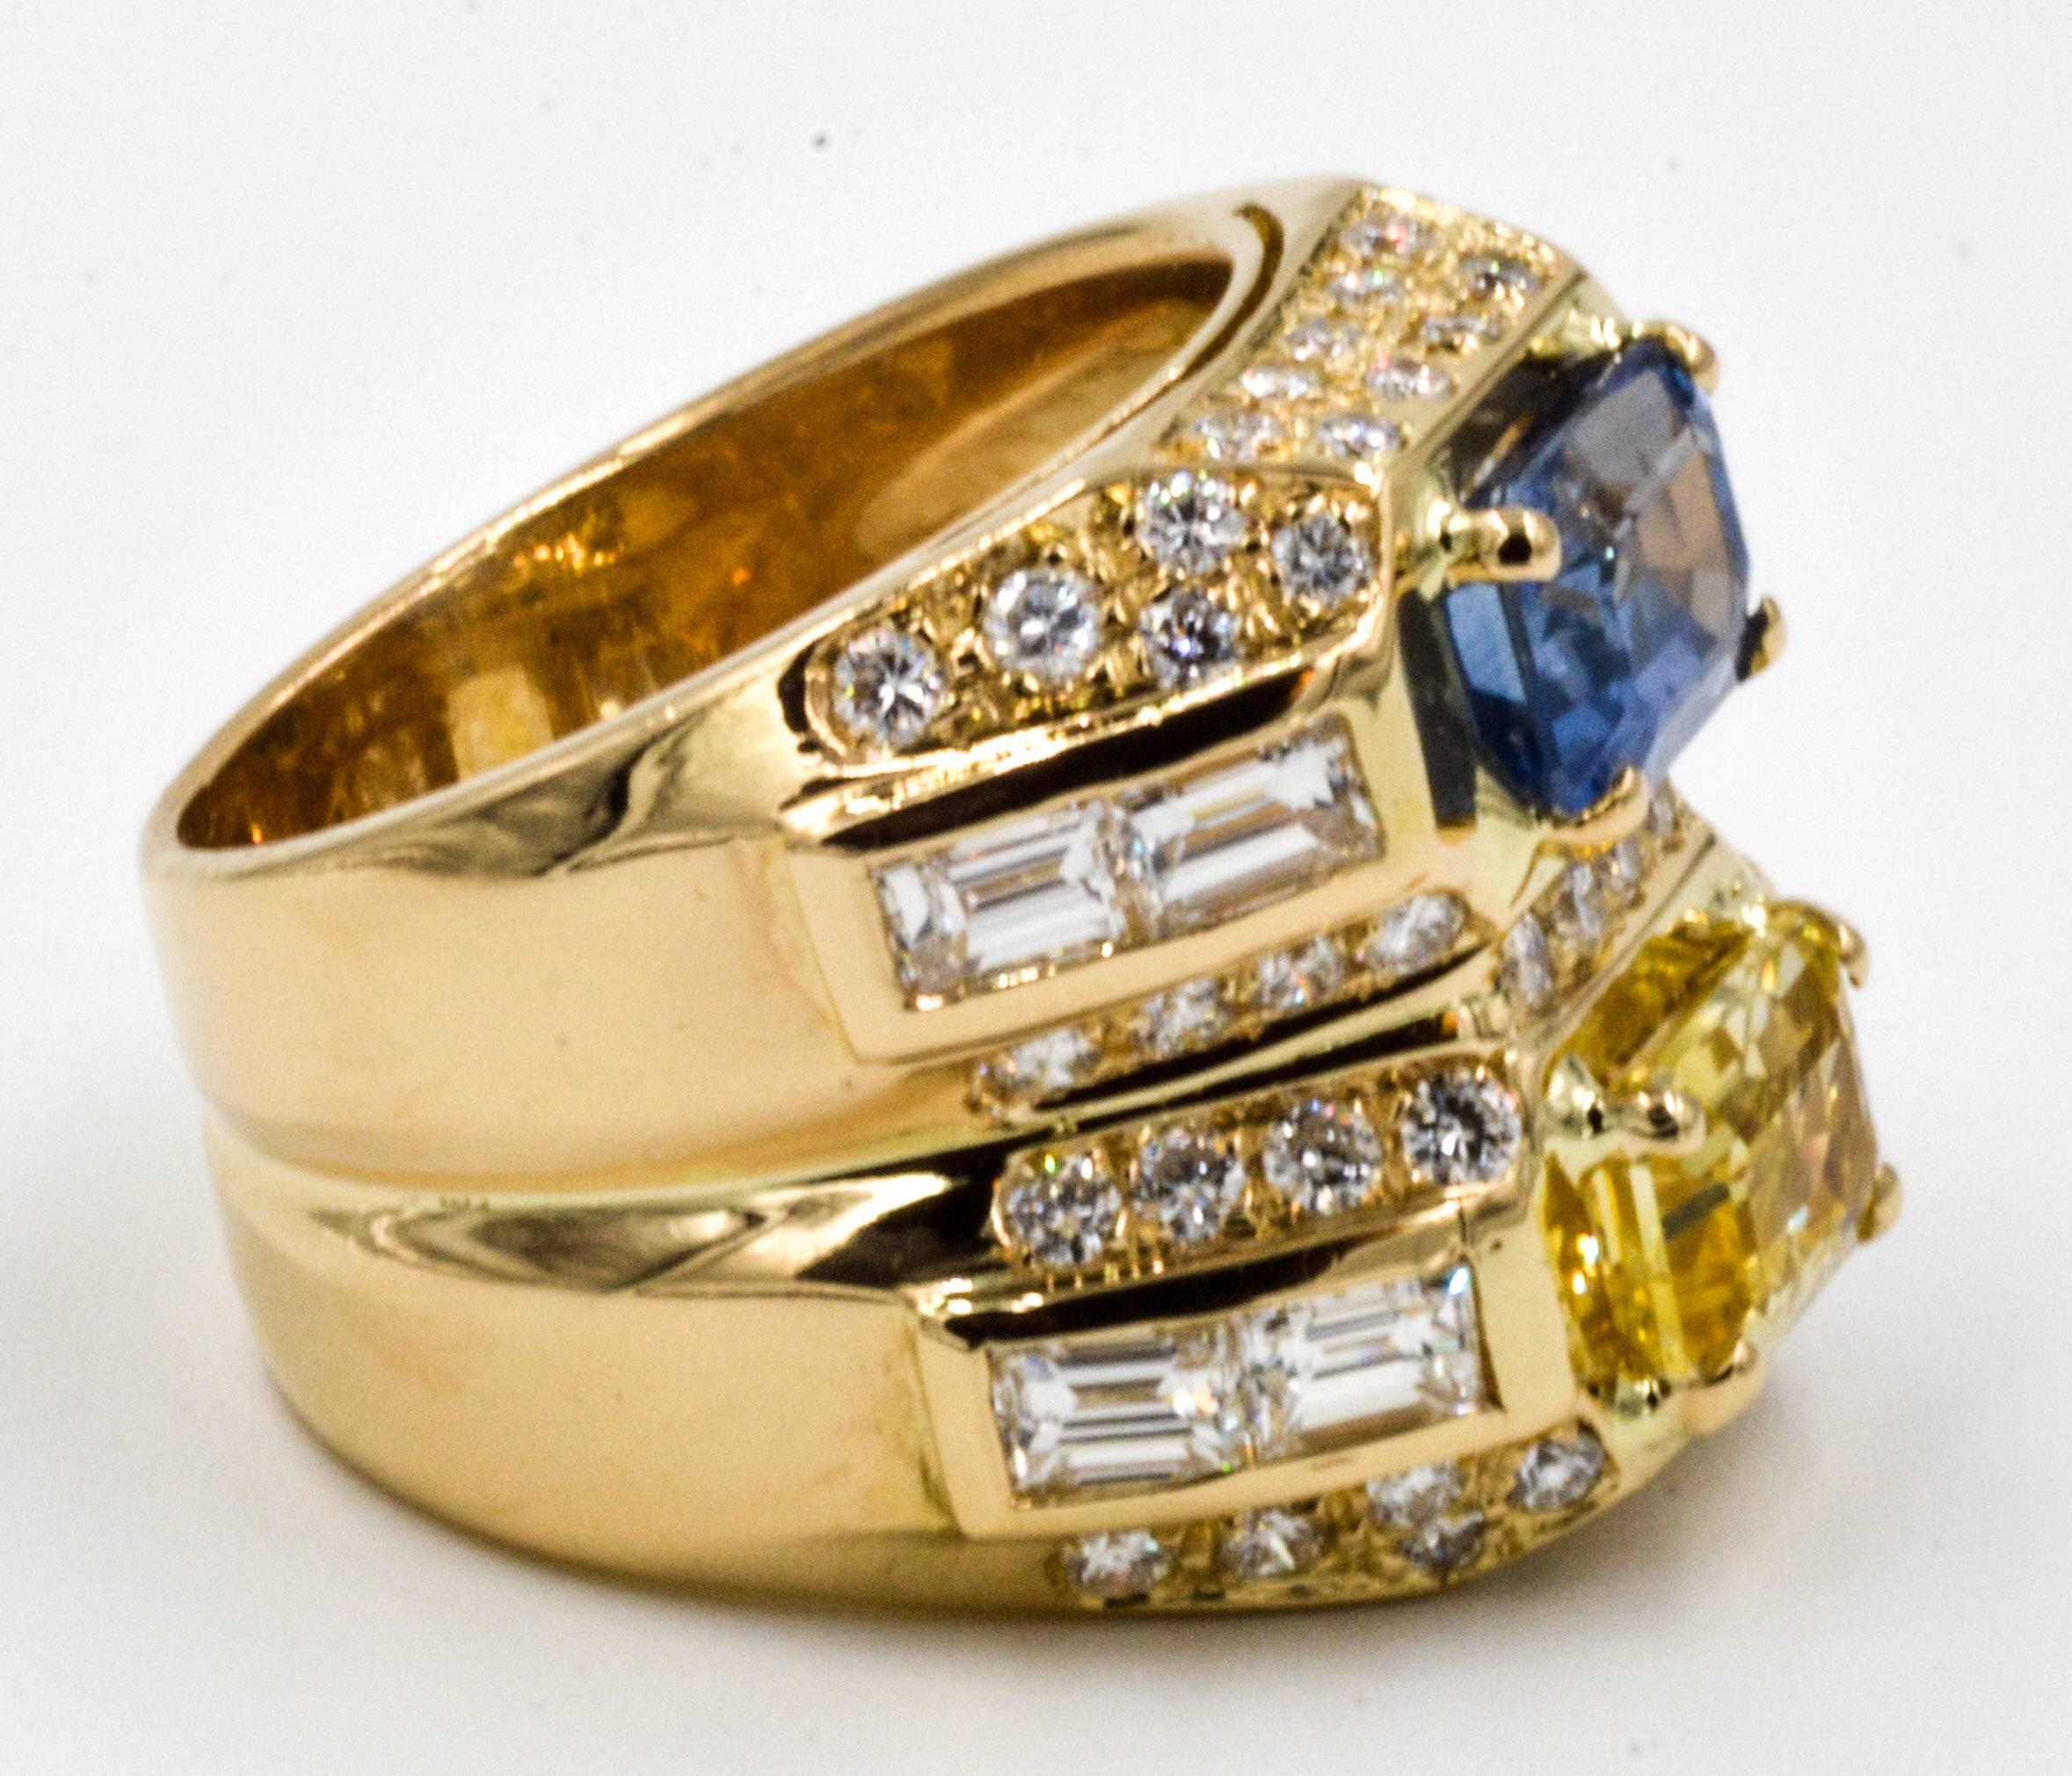 Twin Contrasting Yellow and Blue Sapphire 18 Karat Yellow Gold and Diamond Ring 1